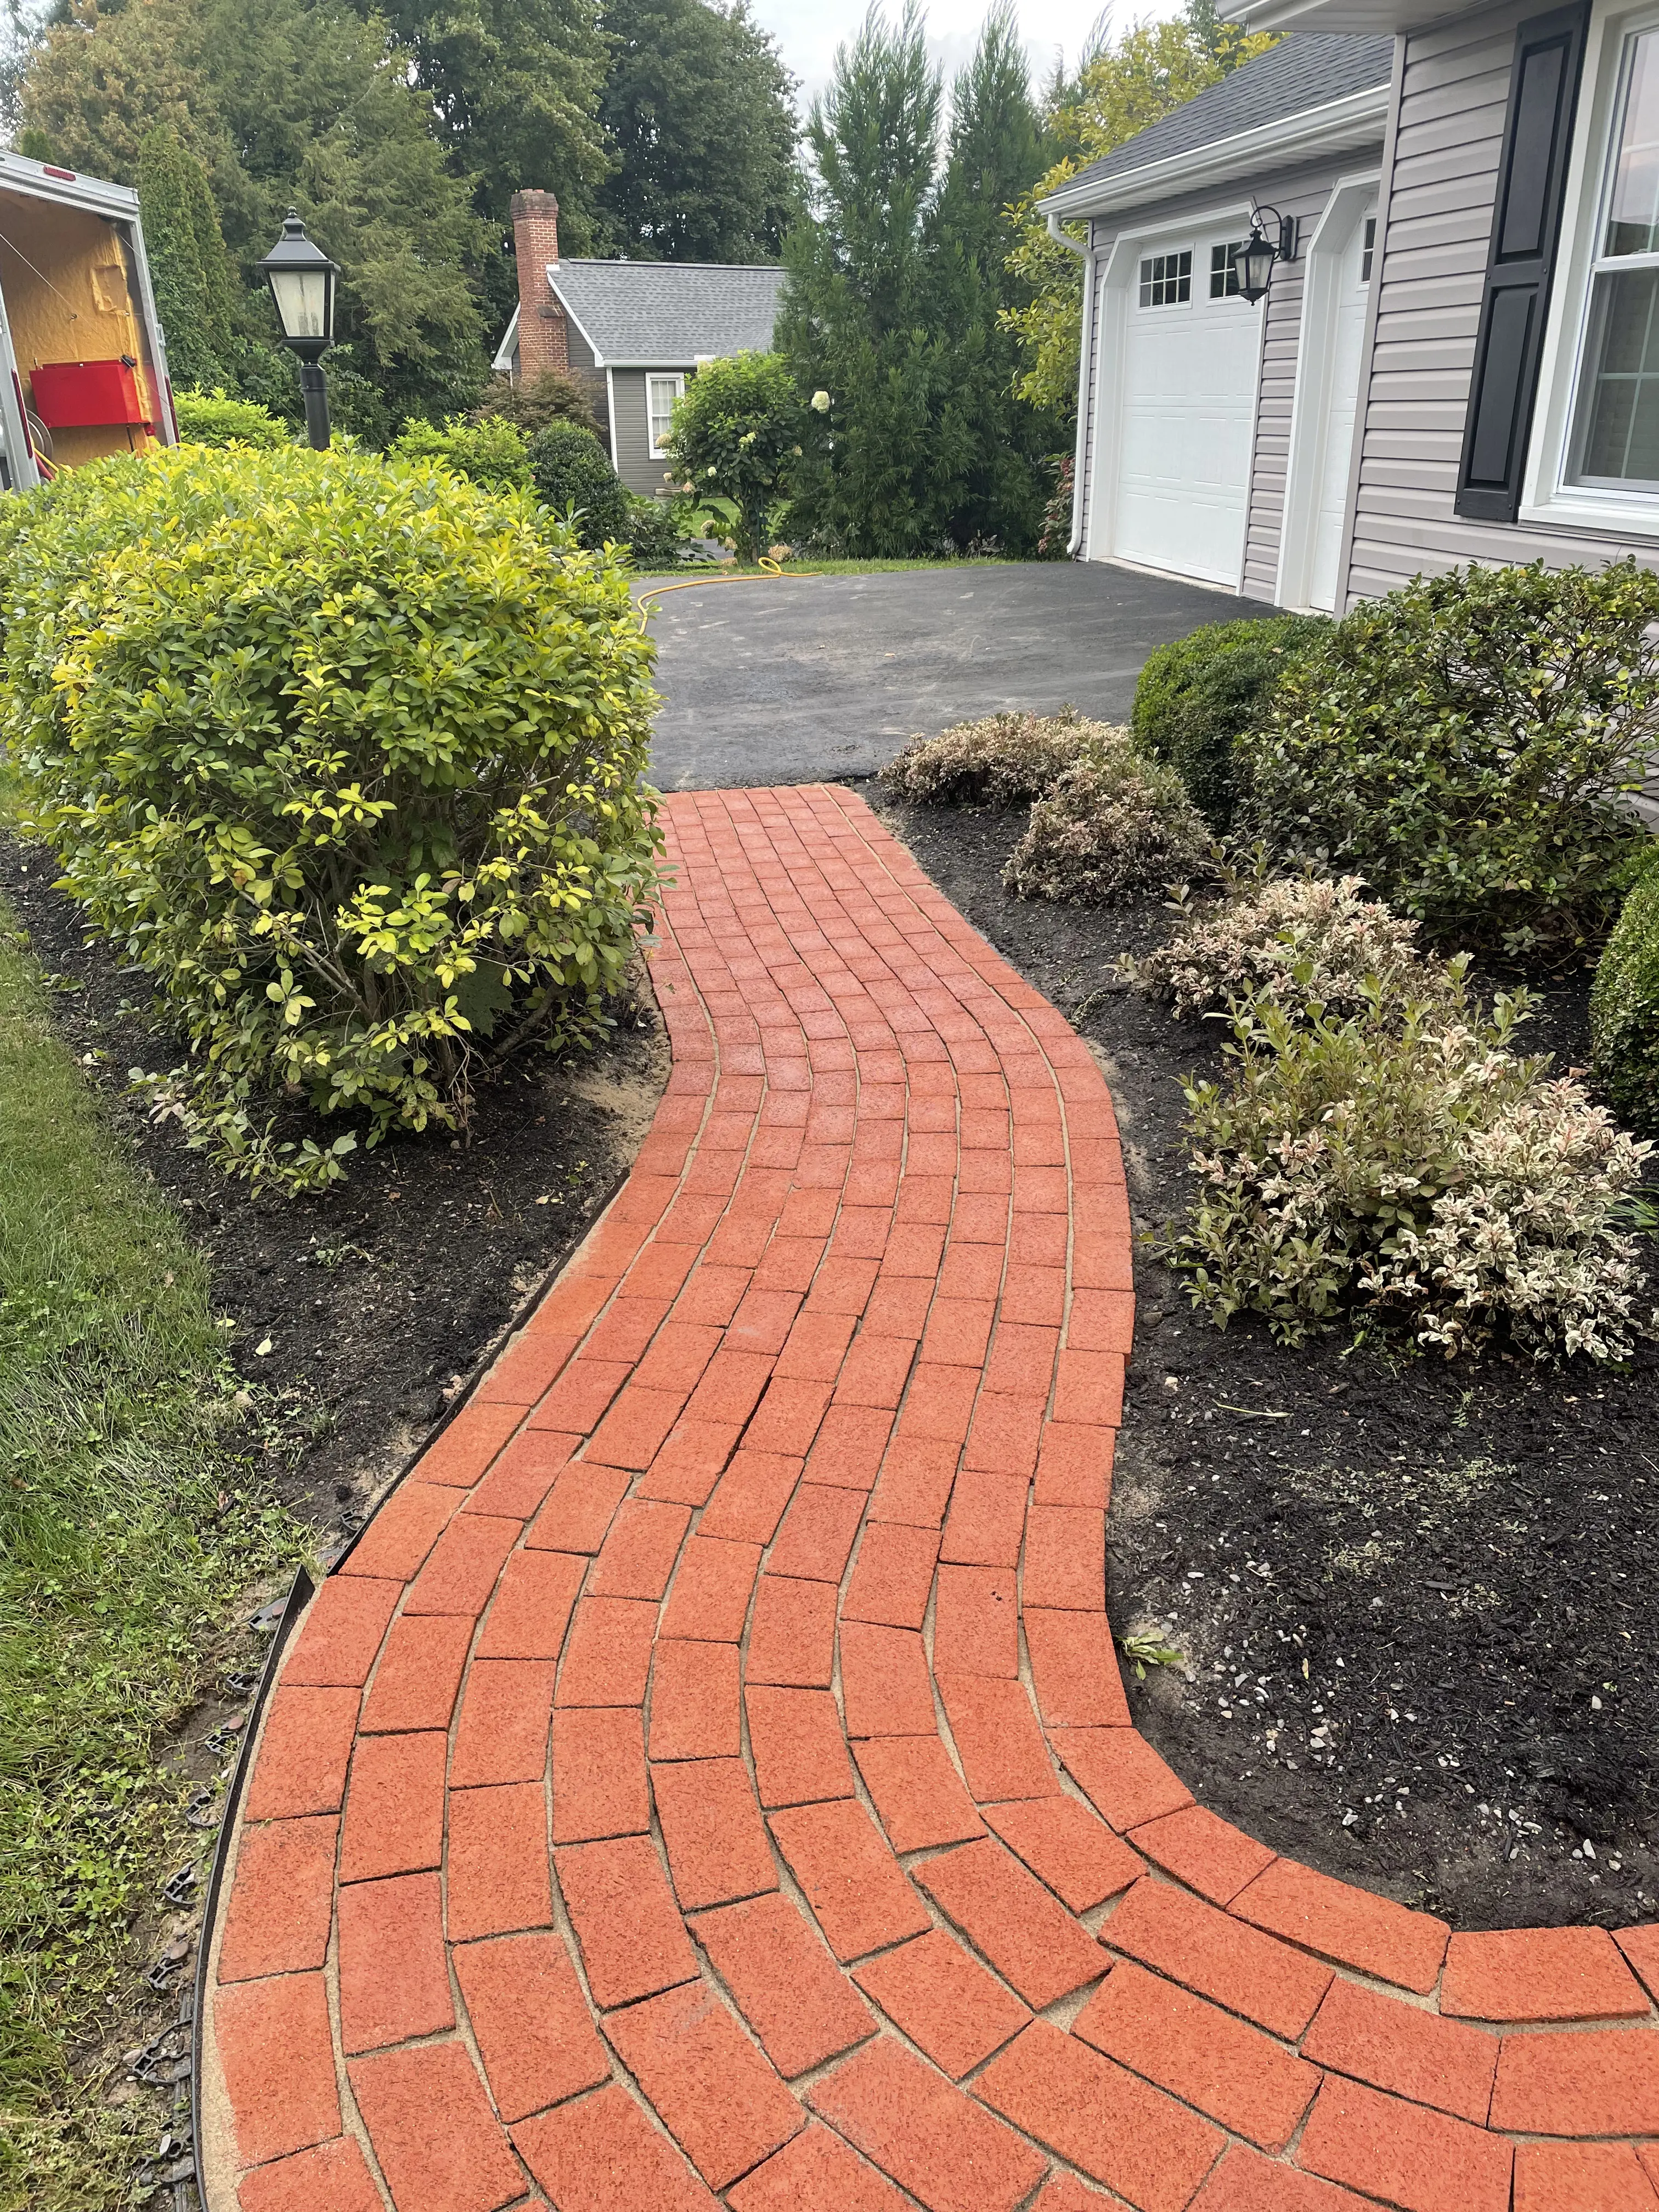 Expert paver restoration services in Selinsgrove PA by NextGen Power Wash LLC